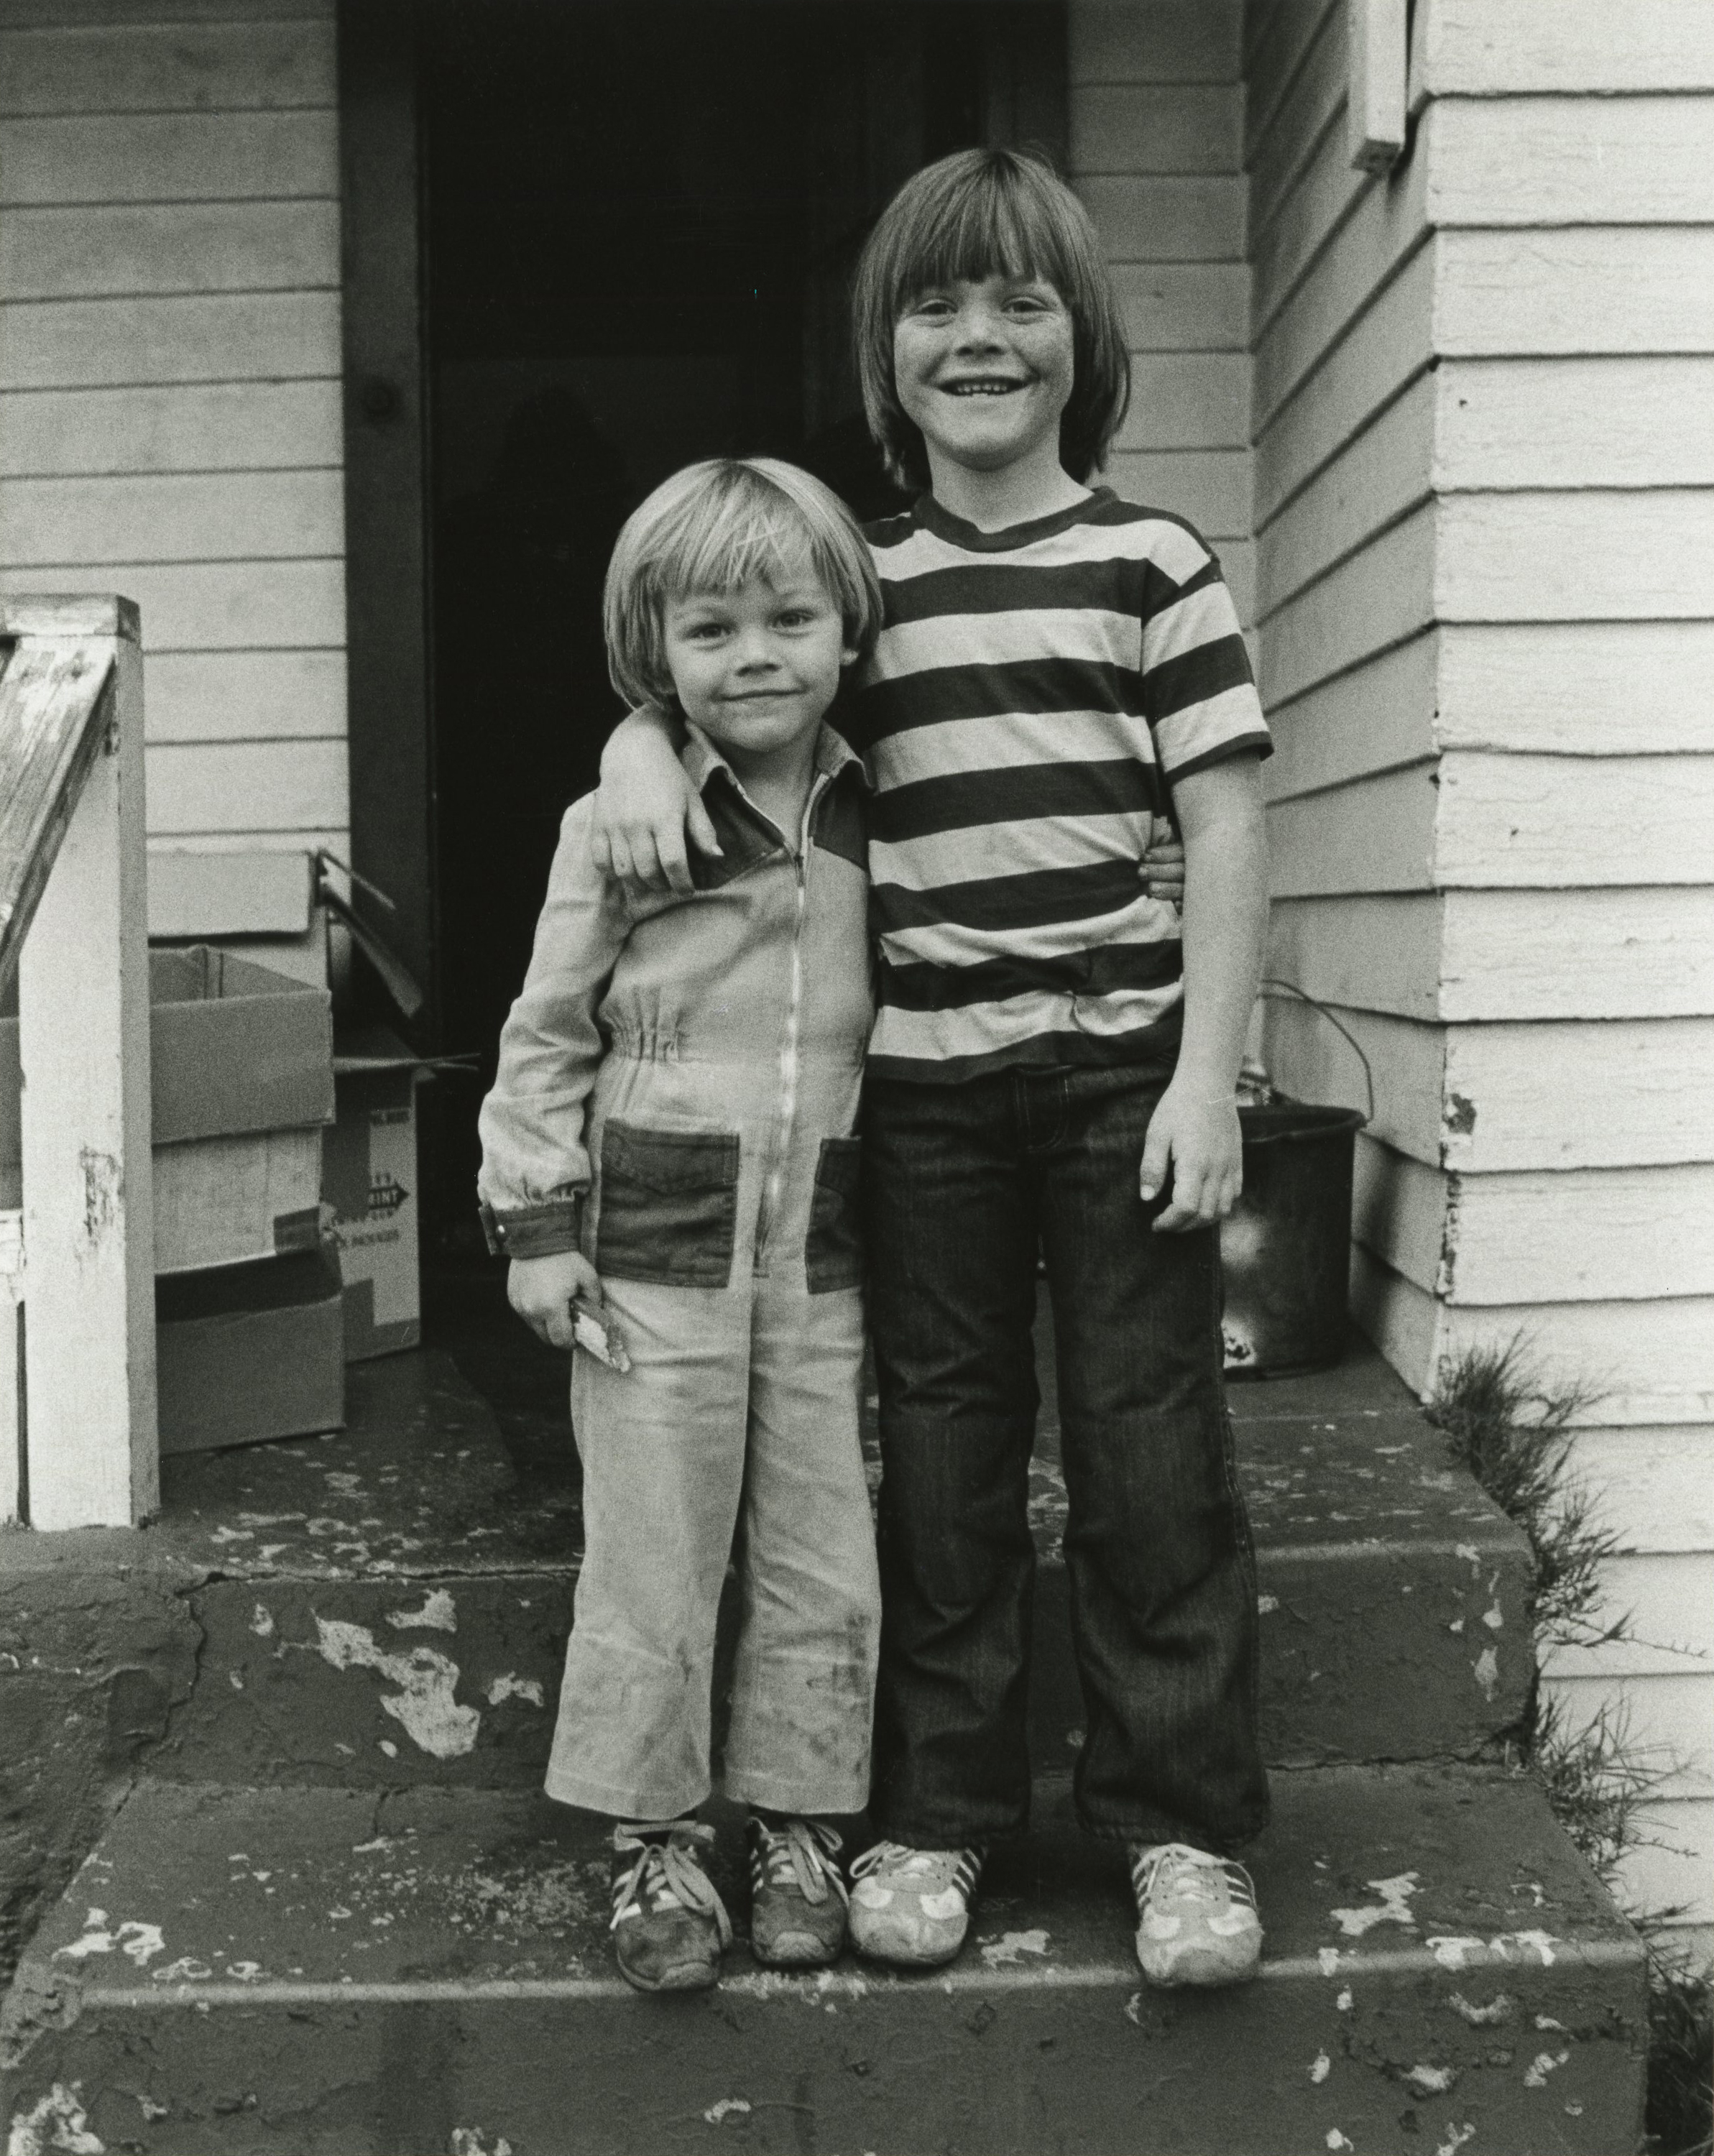 The young boy and his step-brother pose outside their house in July 1978 in Hollywood, California | Source: Getty Images